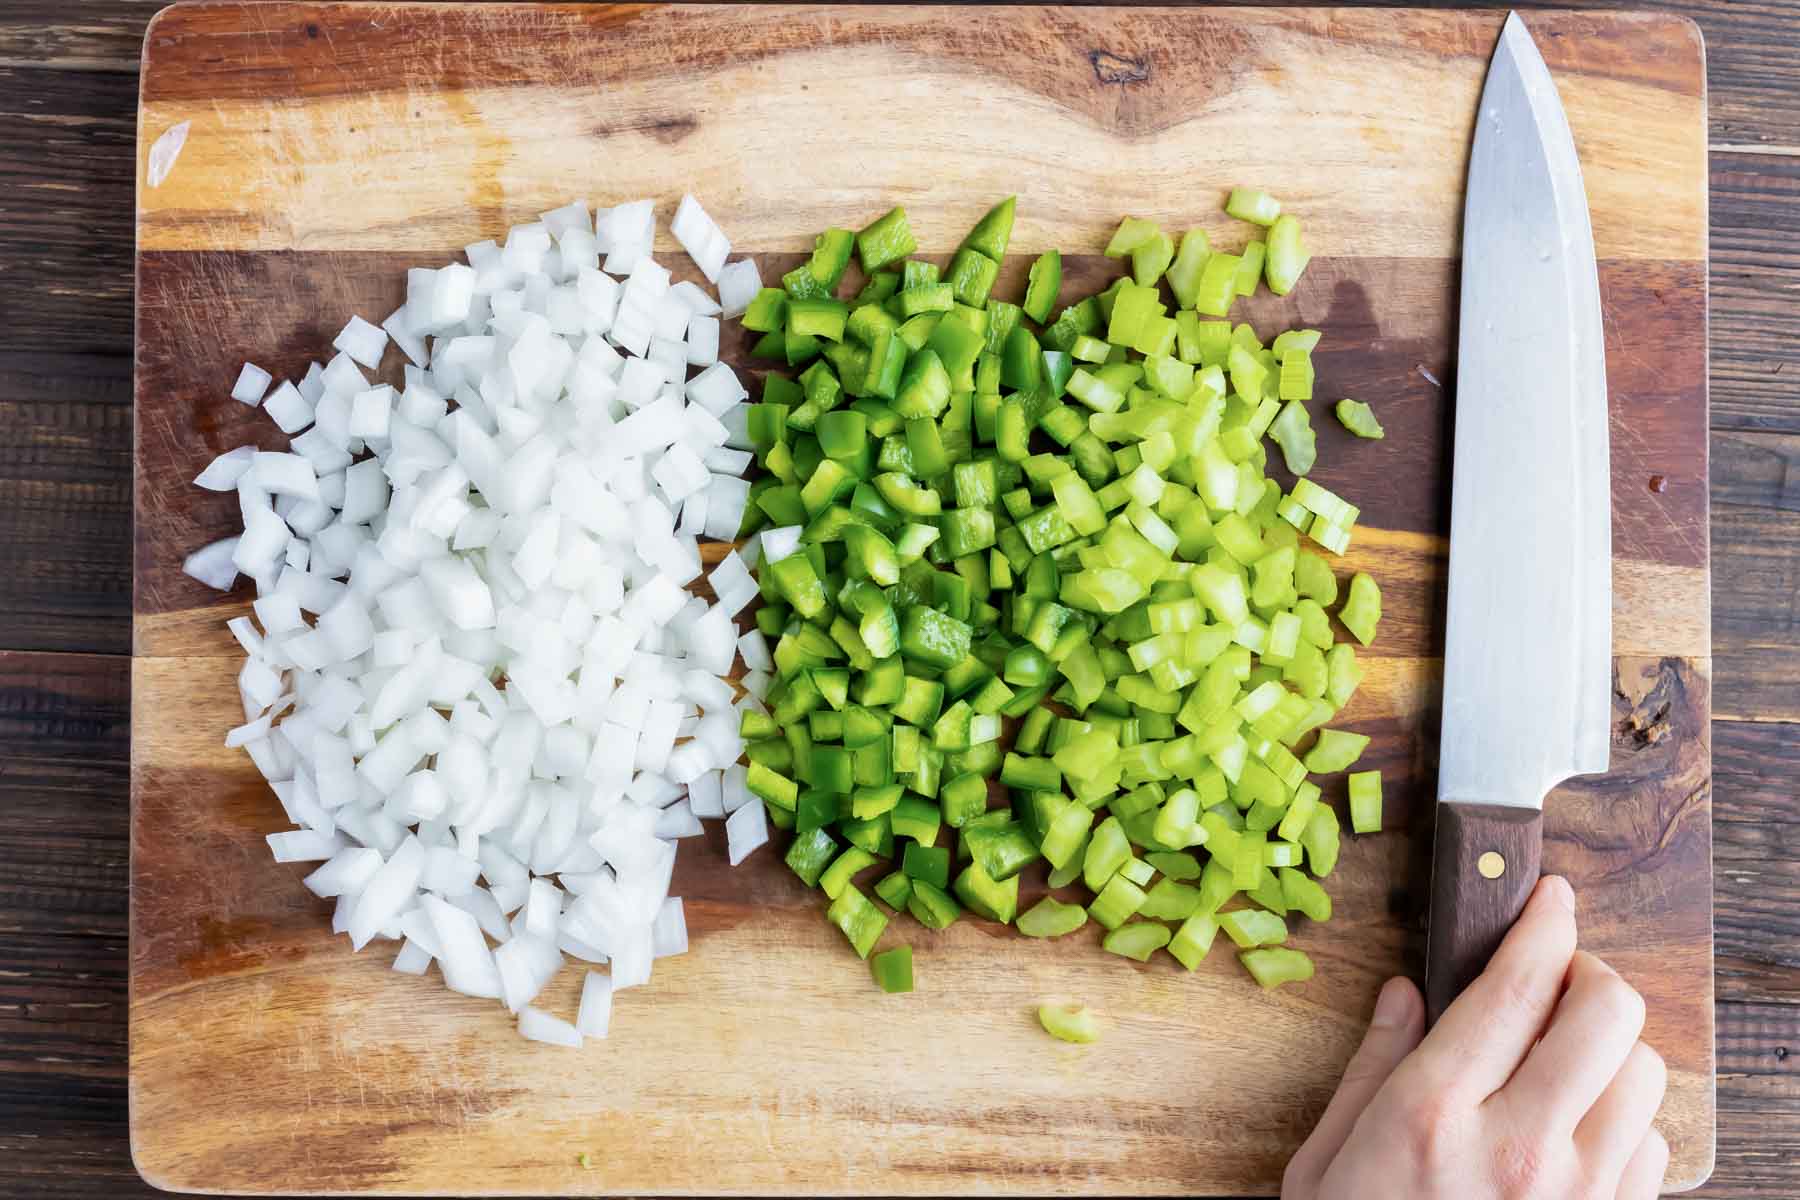 Finely diced onions, green bell pepper, and celery on a wooden cutting board.